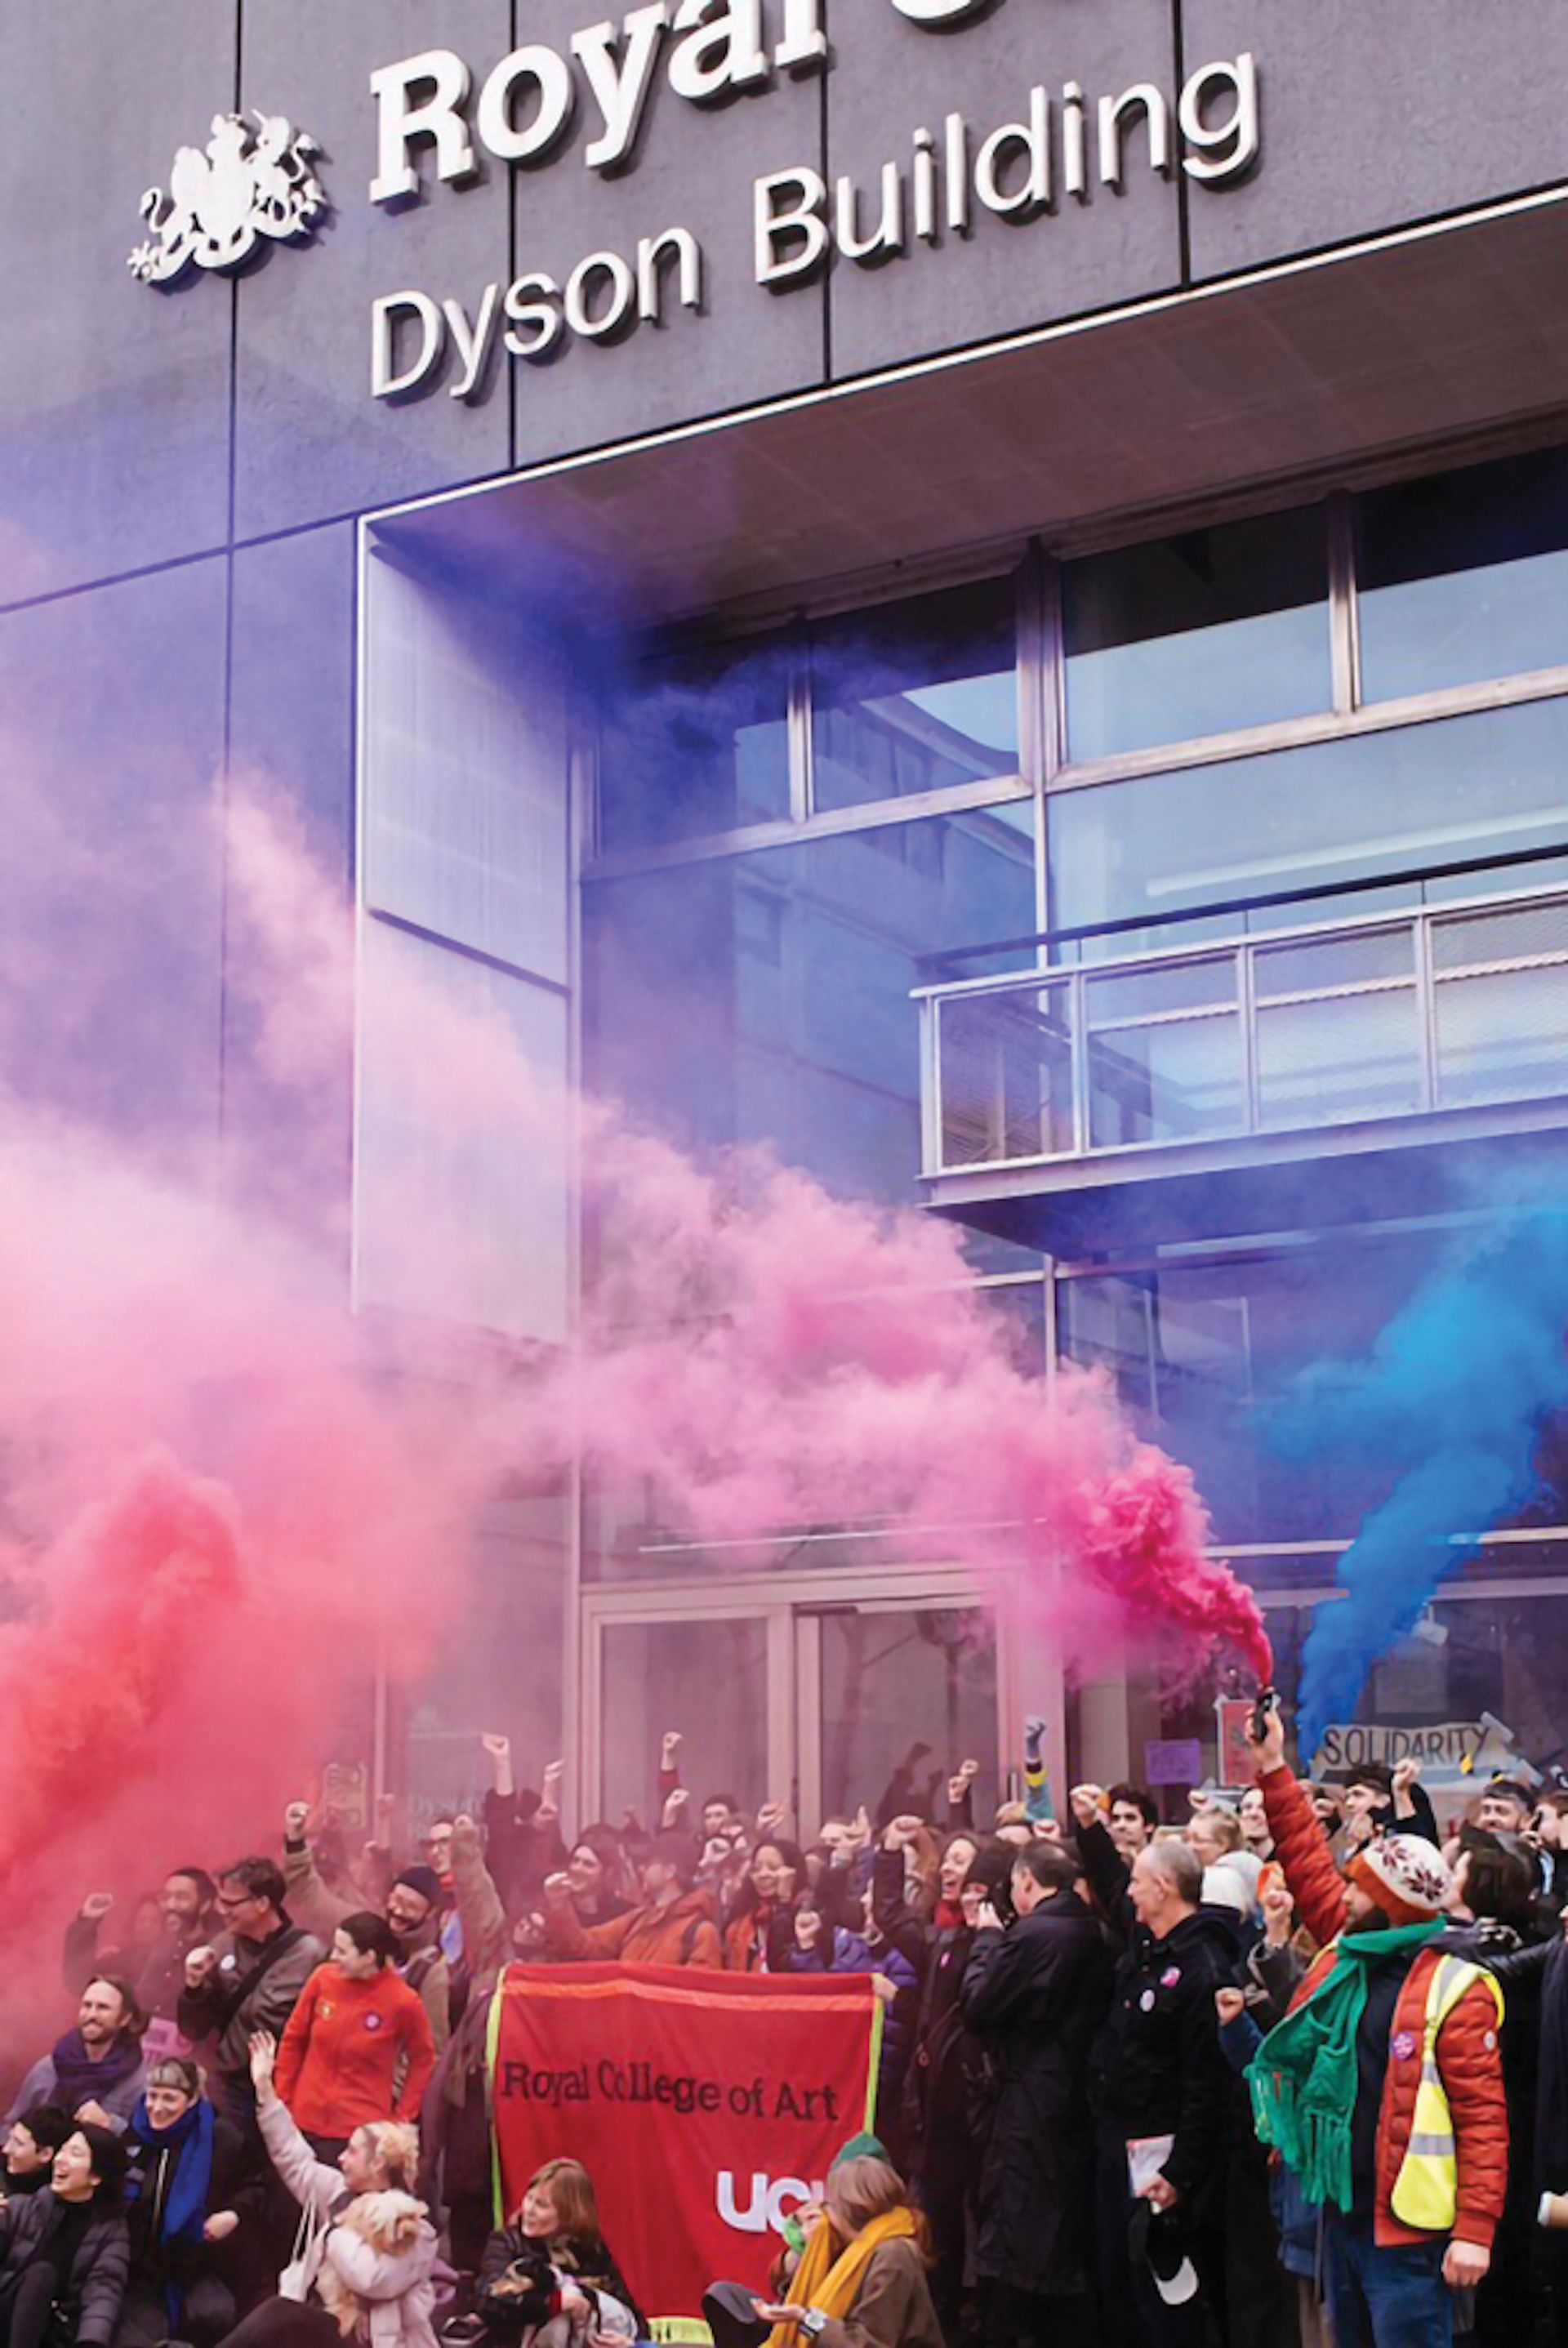 London art schools have been experiencing strikes and protests © Ruudu Ulas